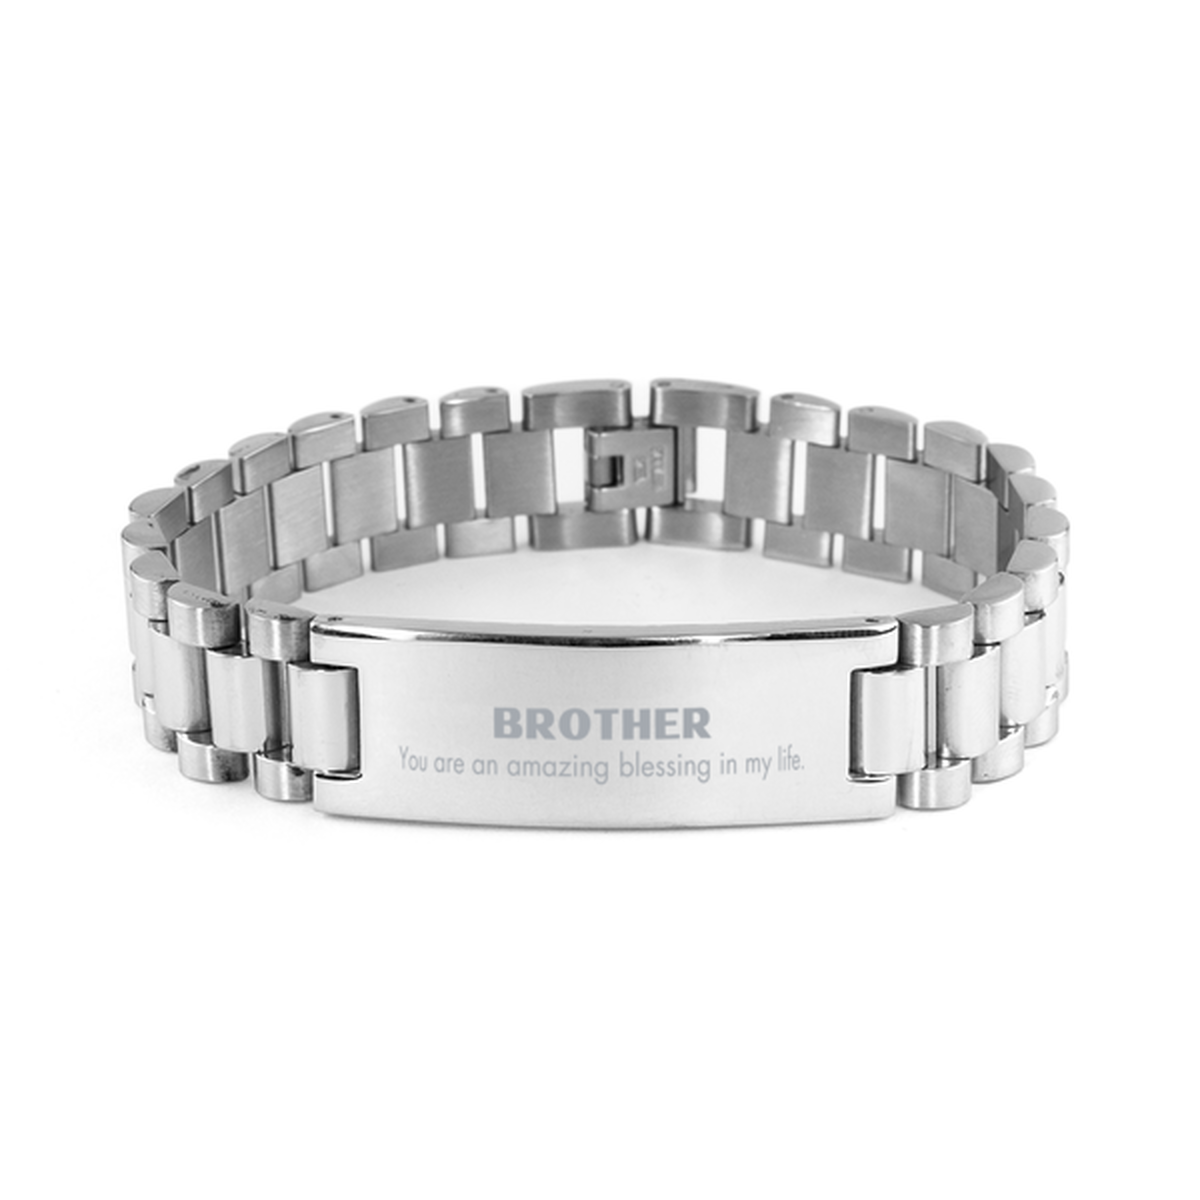 Brother Ladder Stainless Steel Bracelet, You are an amazing blessing in my life, Thank You Gifts For Brother, Inspirational Birthday Christmas Unique Gifts For Brother